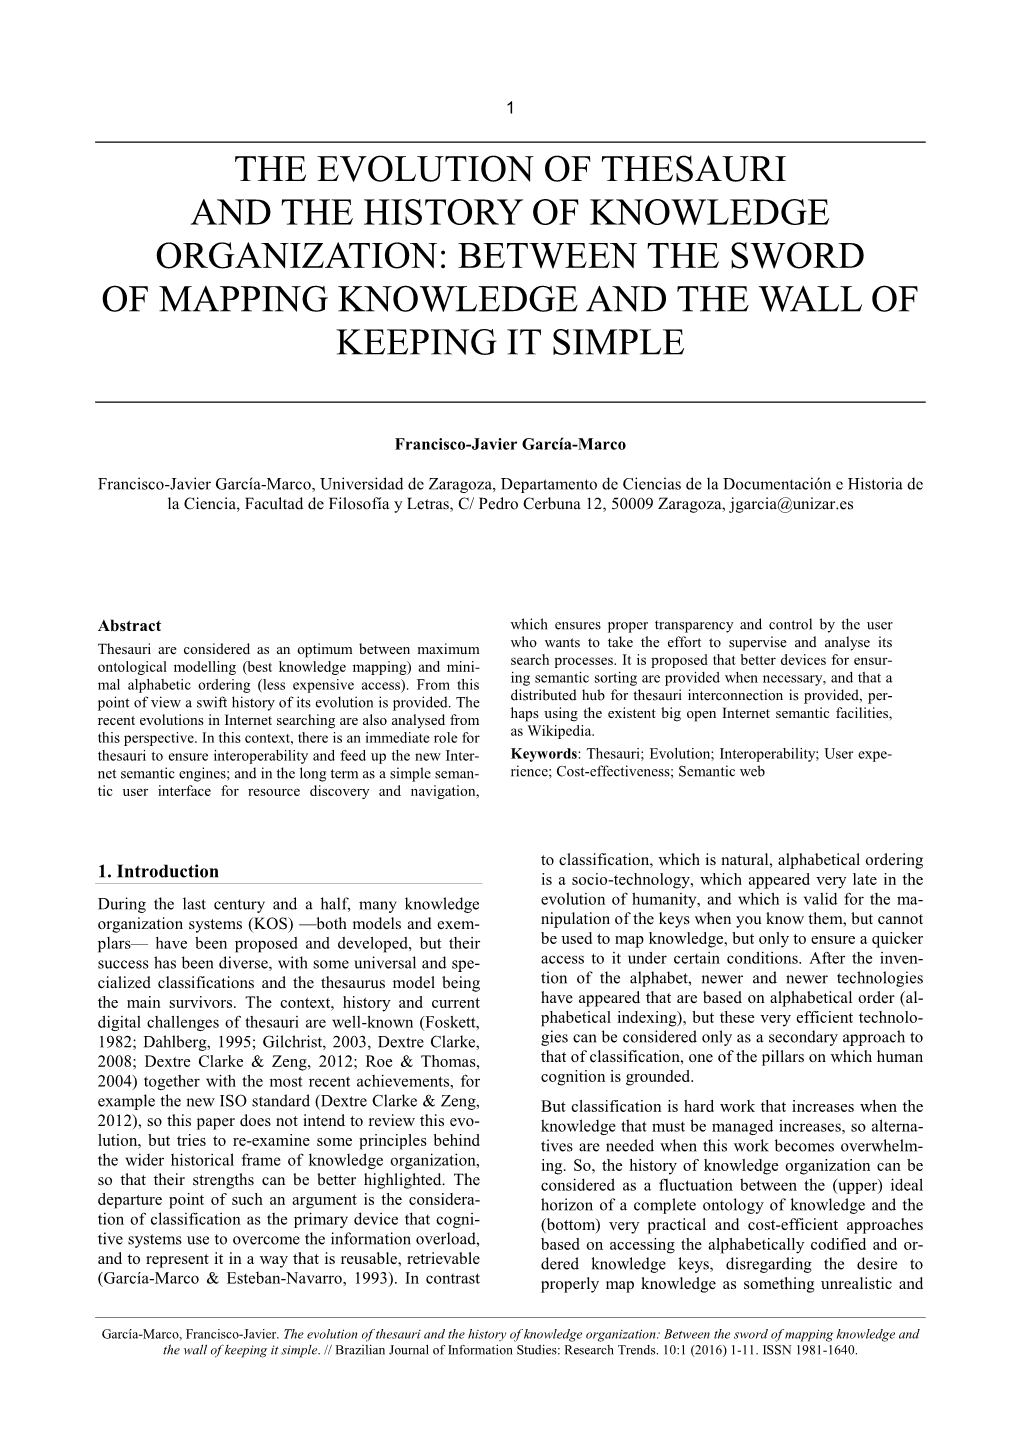 The Evolution of Thesauri and the History of Knowledge Organization: Between the Sword of Mapping Knowledge and the Wall of Keeping It Simple